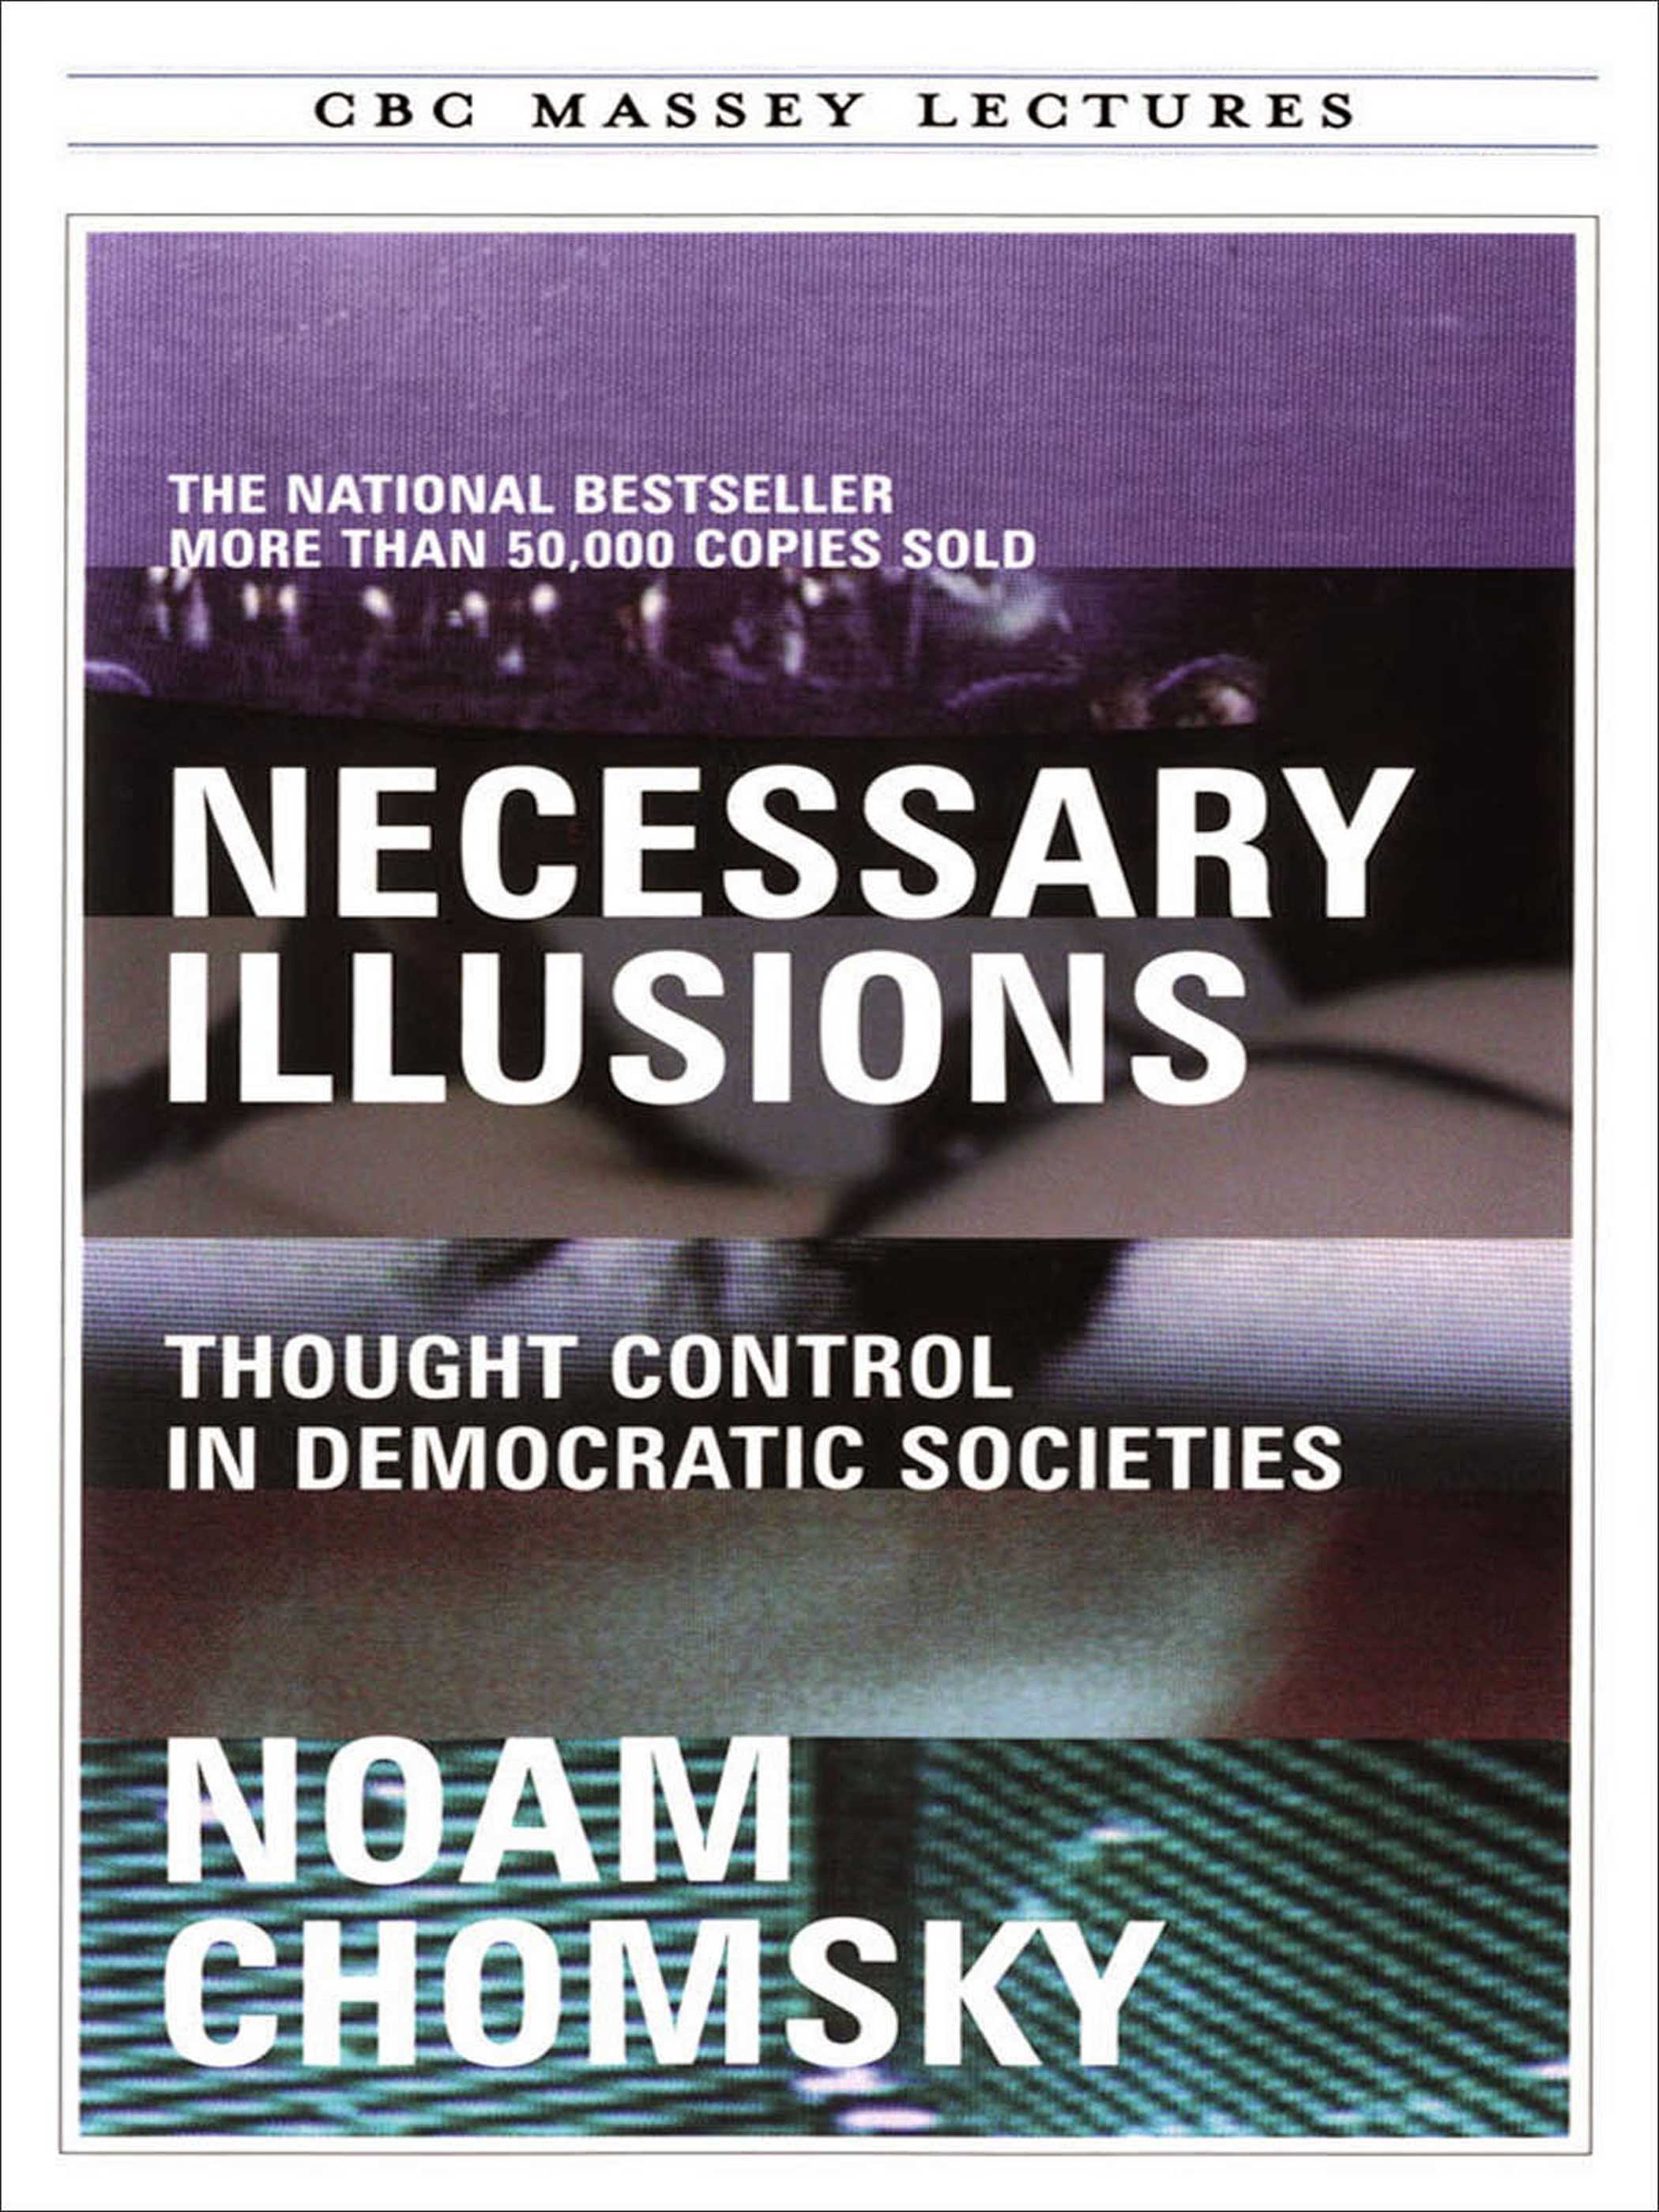 Necessary Illusions: Thought Control in Democratic Societies by Noam Chomsky (Manufacturing Consent: The Political Economy of the Mass Media)